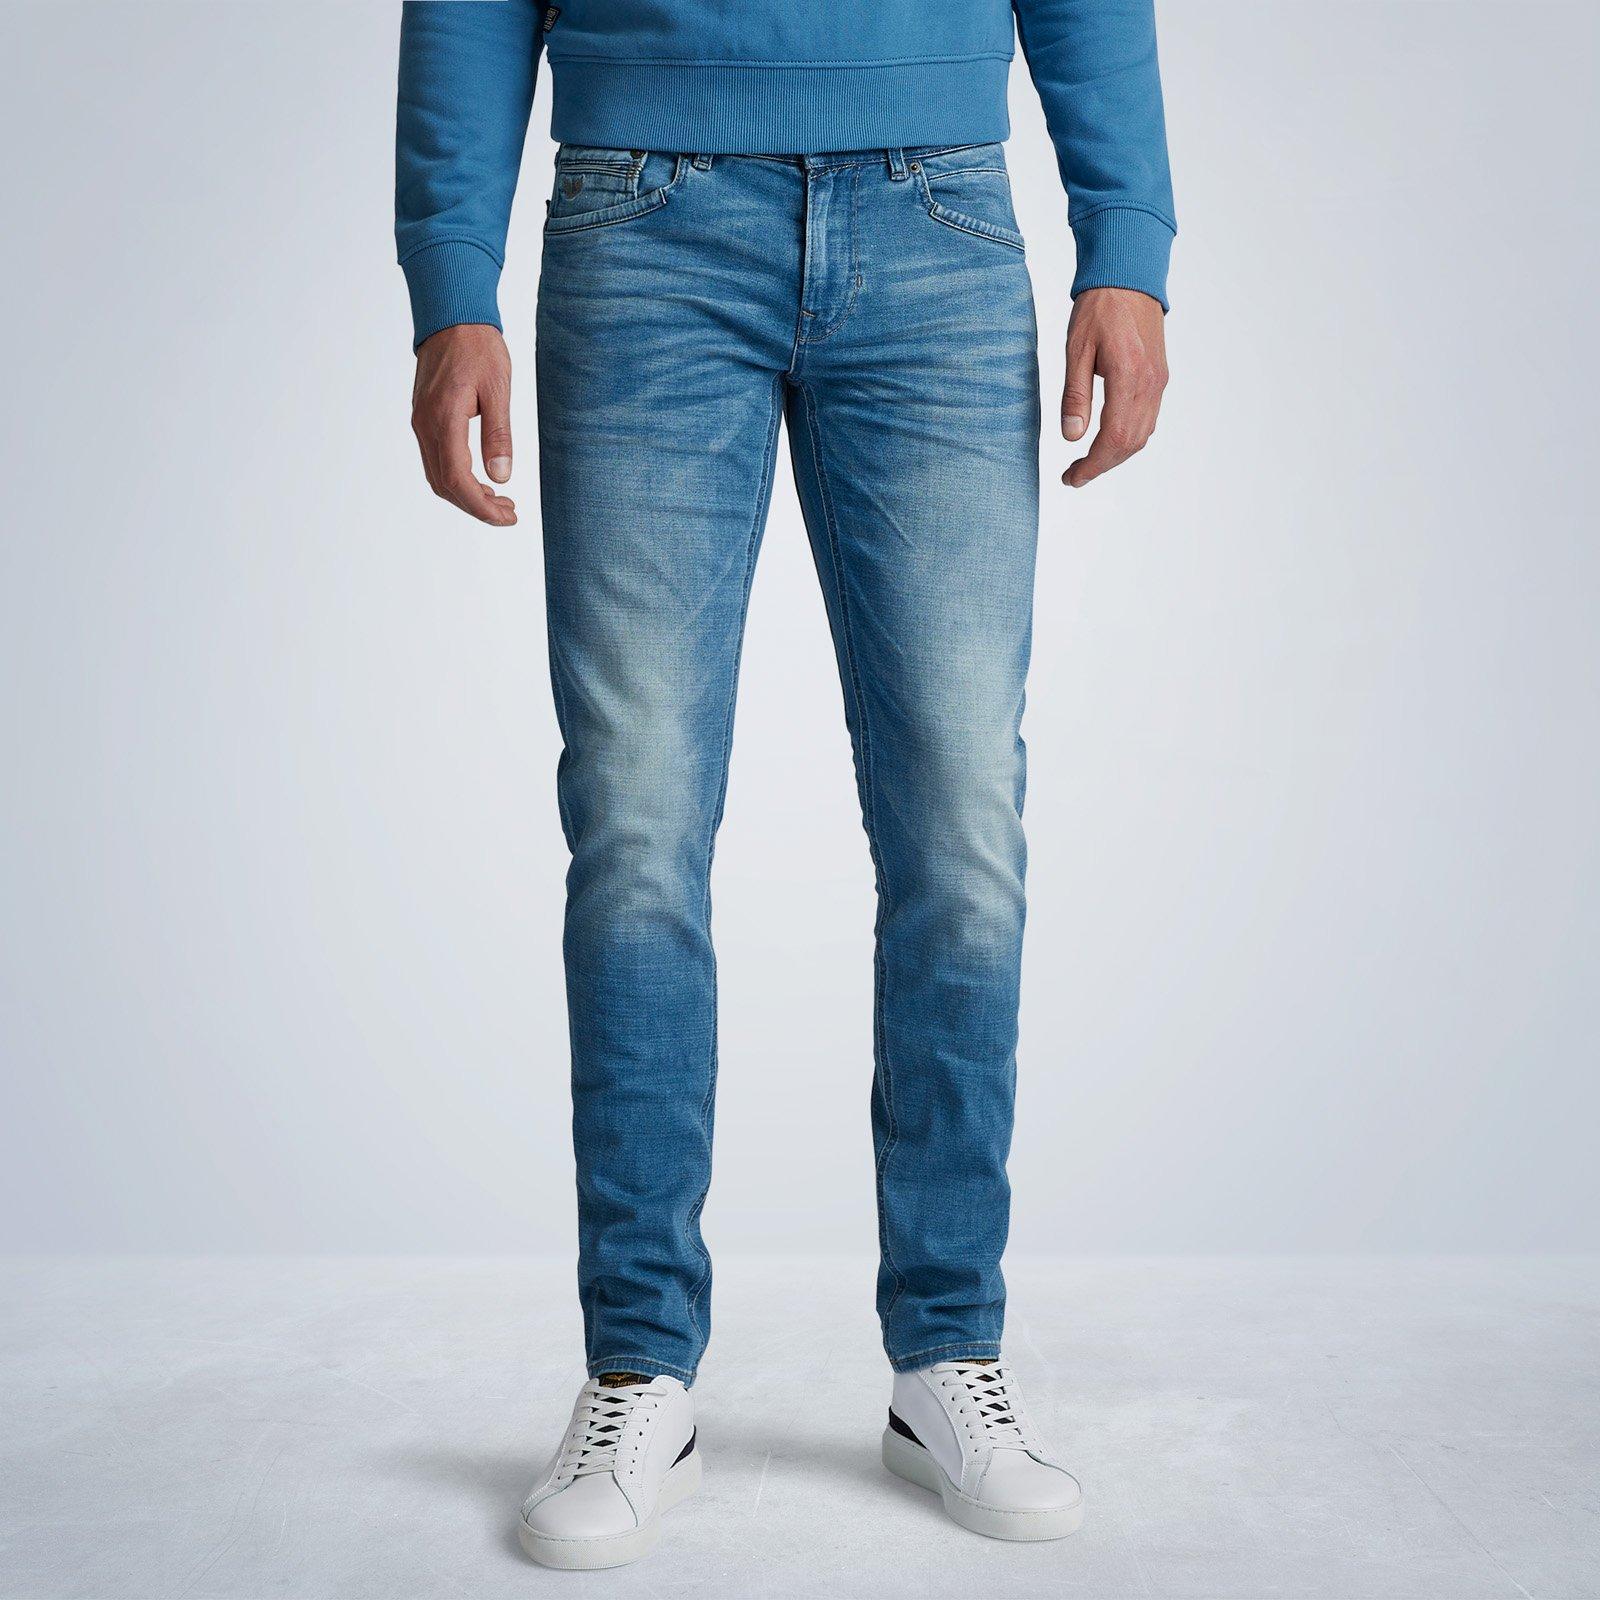 PME Legend Tailwheel Jeans product